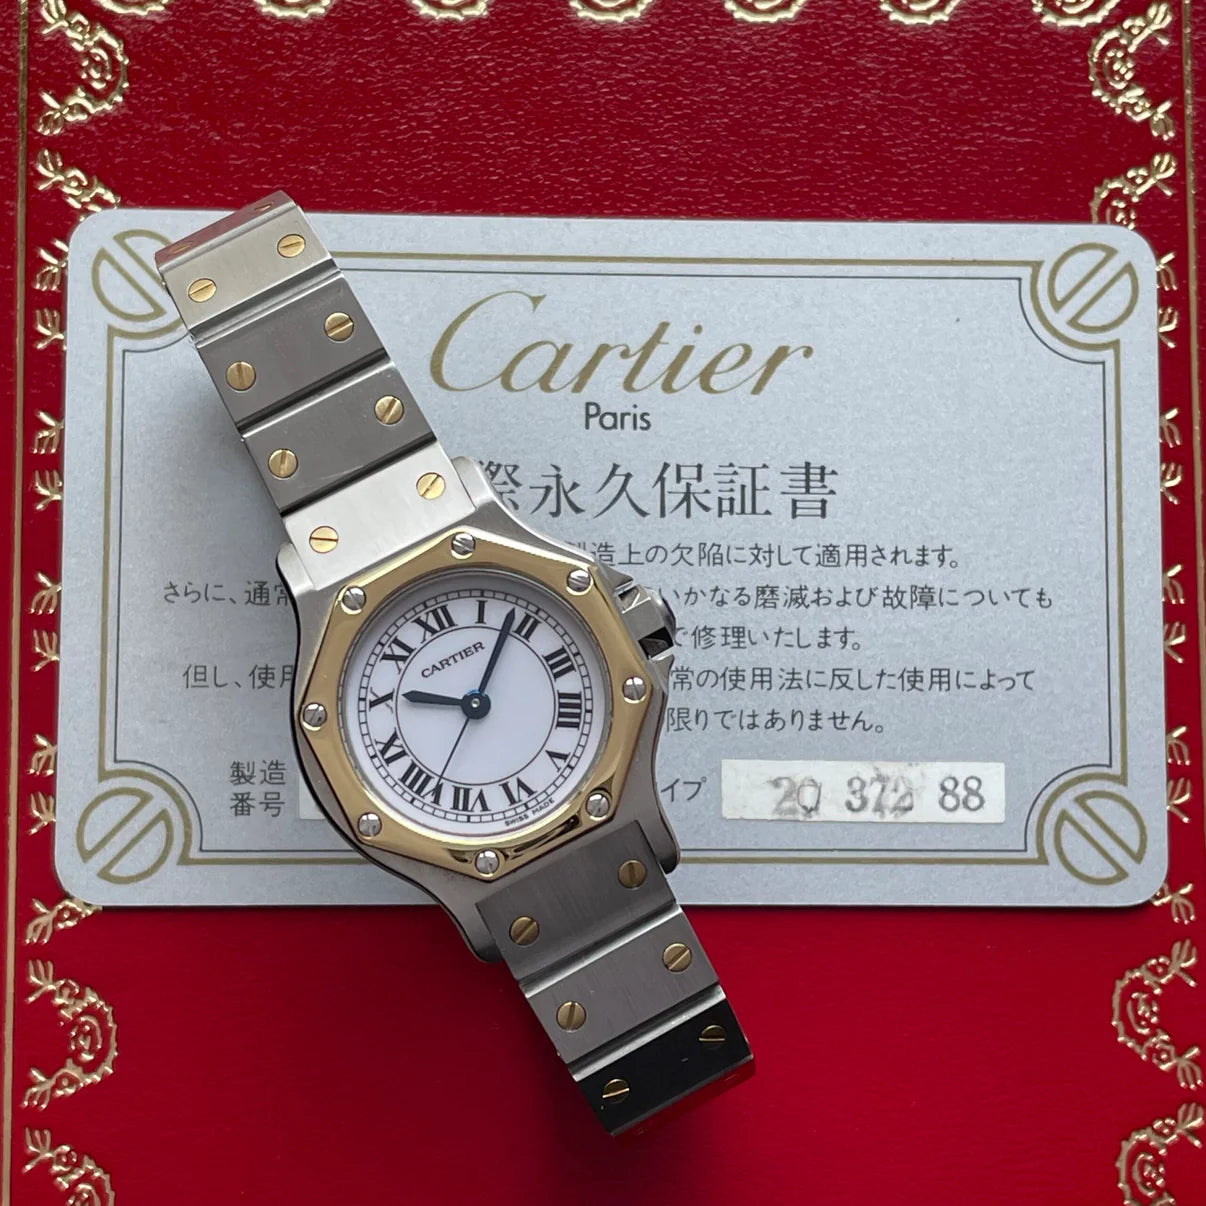 【Cartier】サントスオクタゴンSMコンビ永久保証書付き